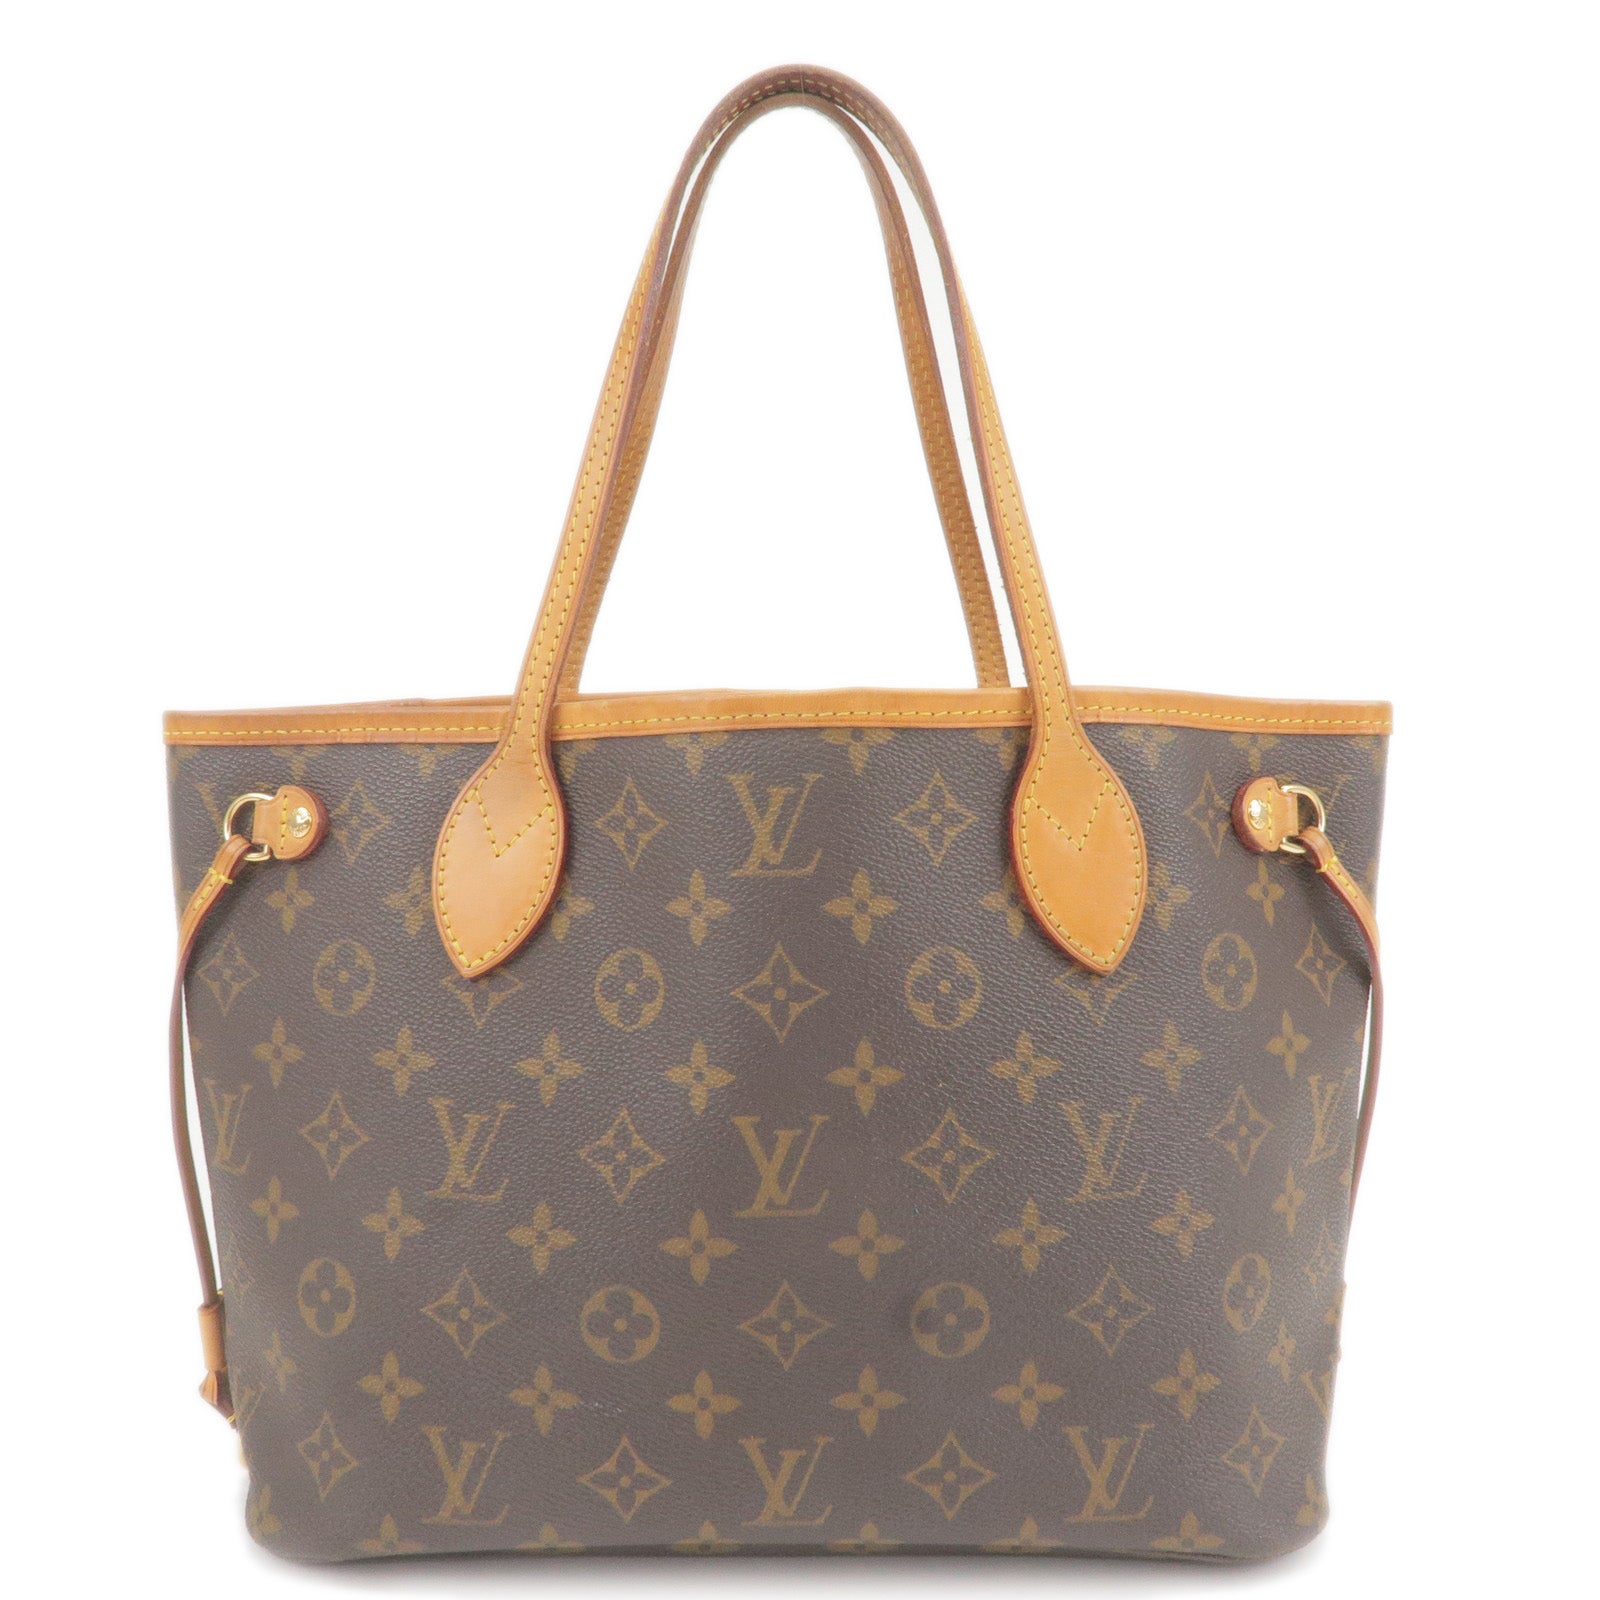 Louis Vuitton Neverfull Pm Brown Canvas Tote Bag (Pre-Owned)